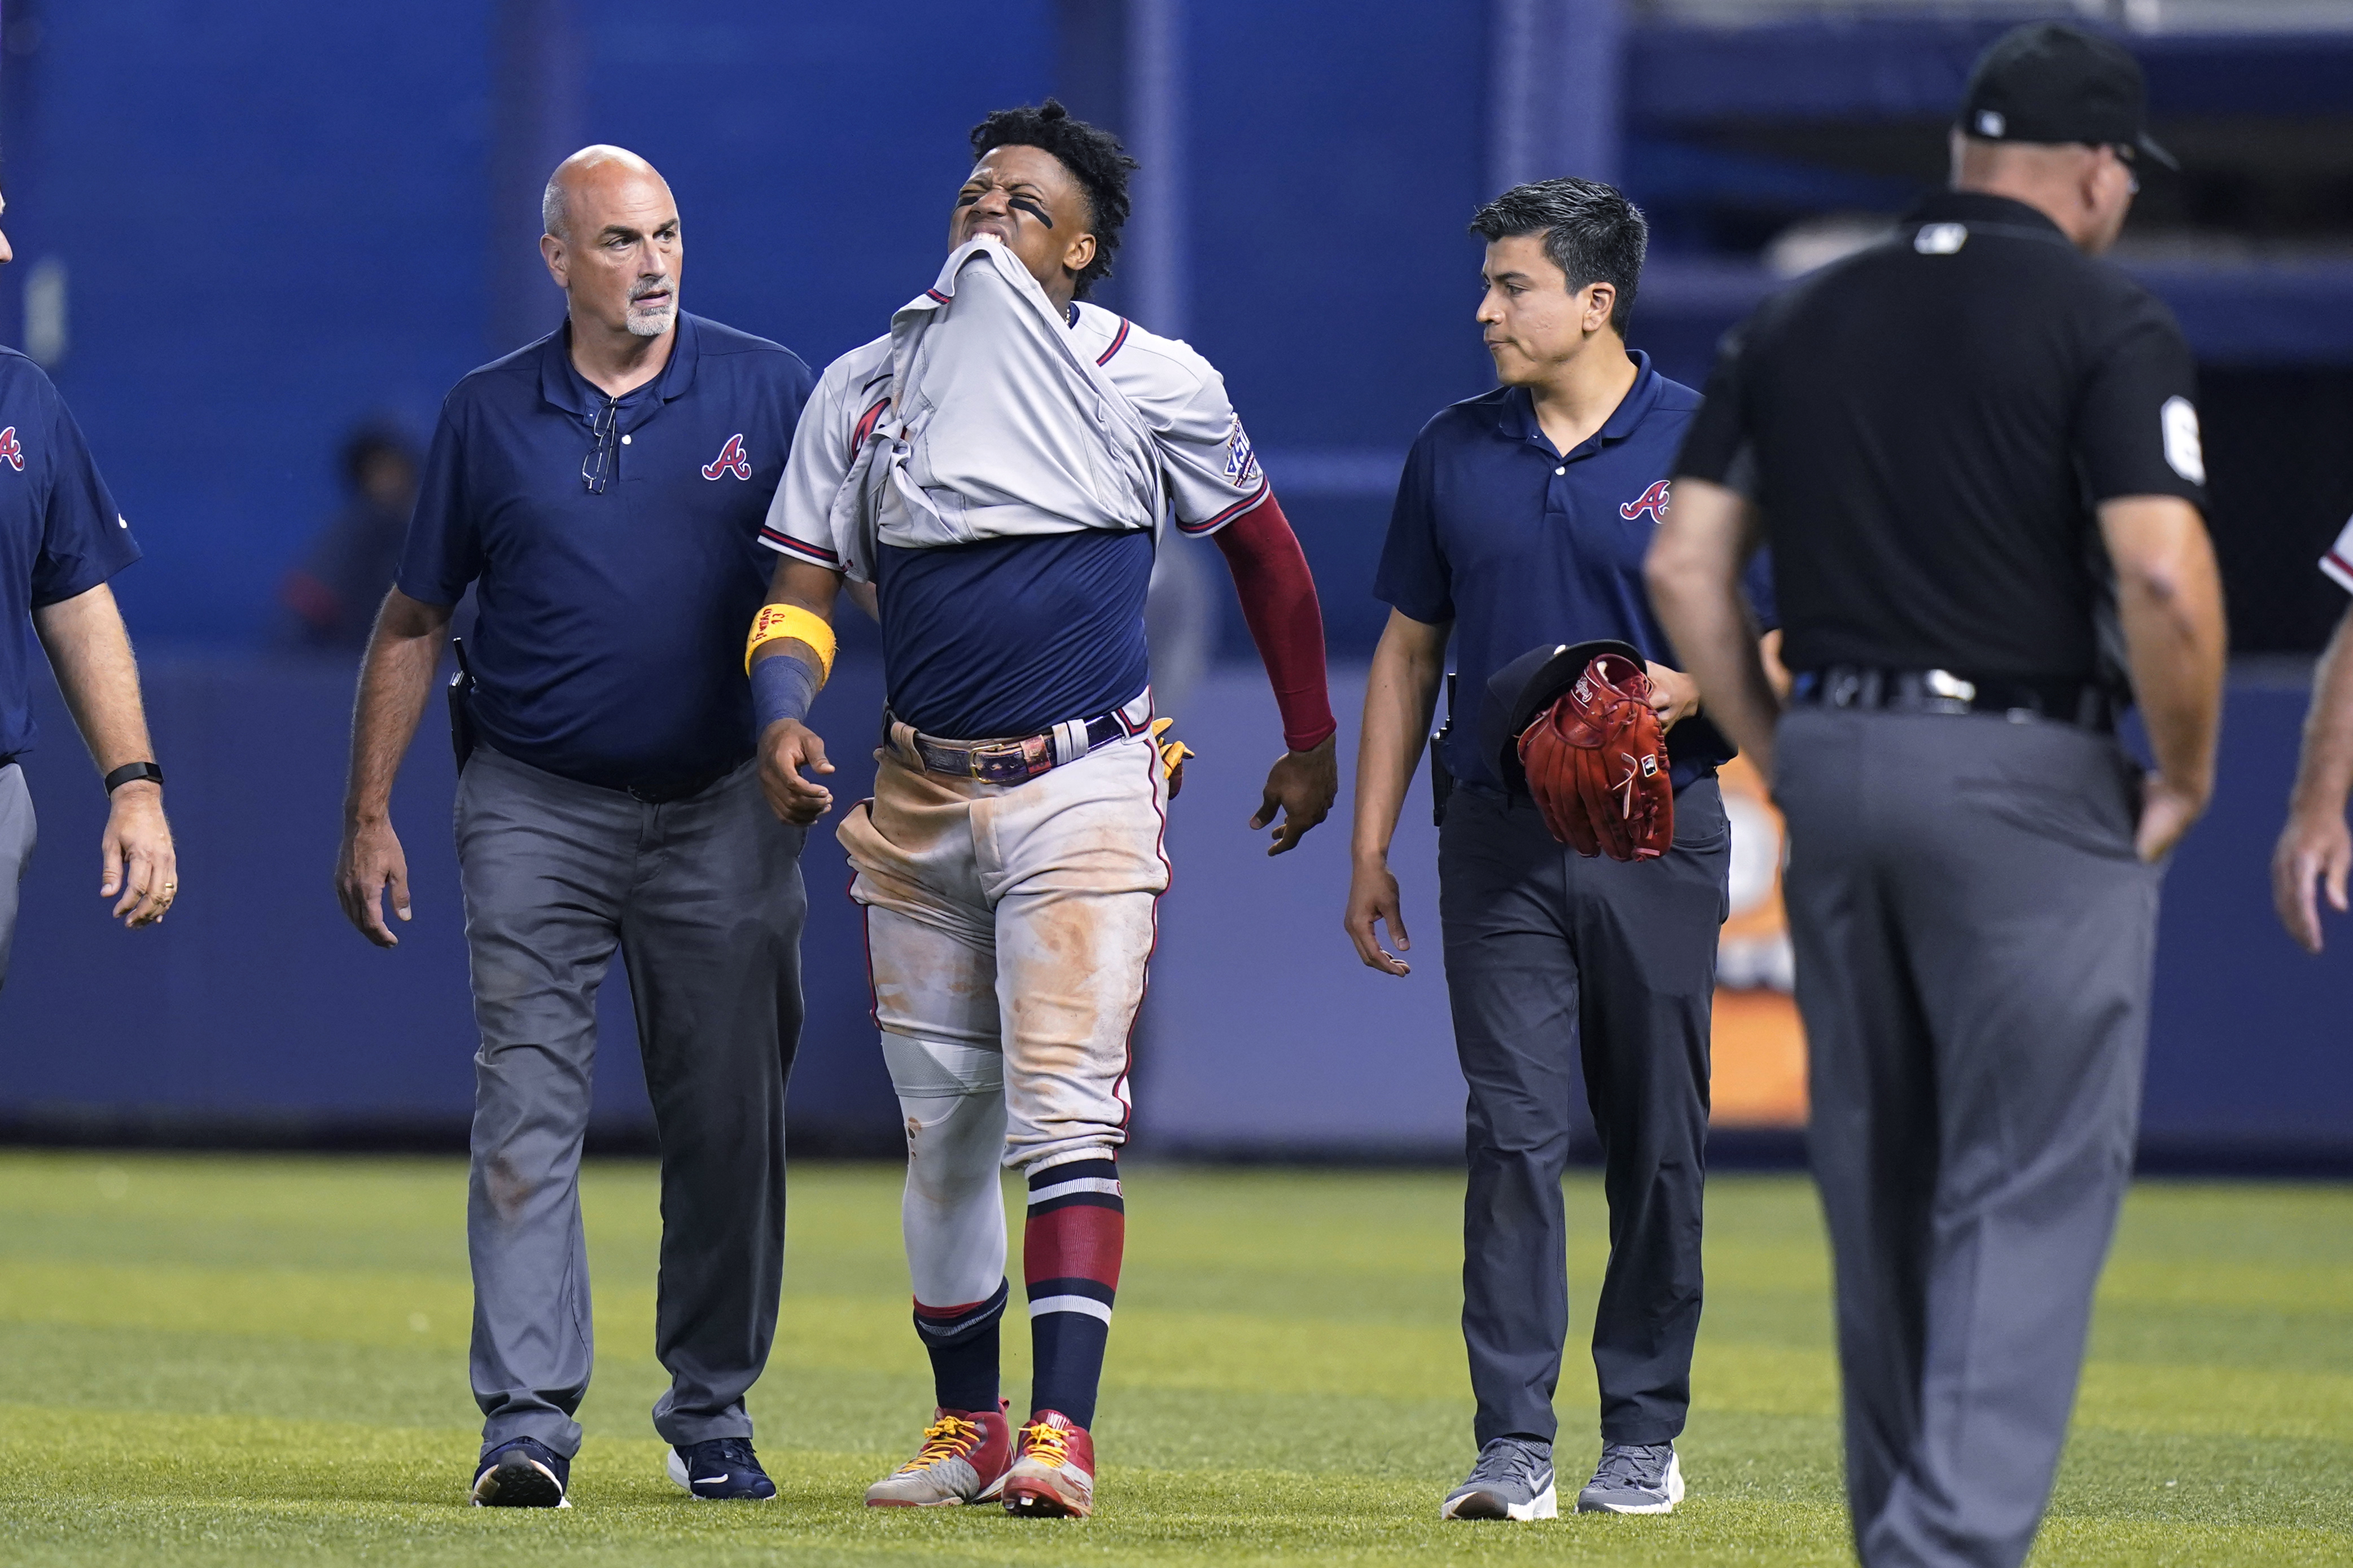 Braves star Acuña out for season after tearing knee vs Miami